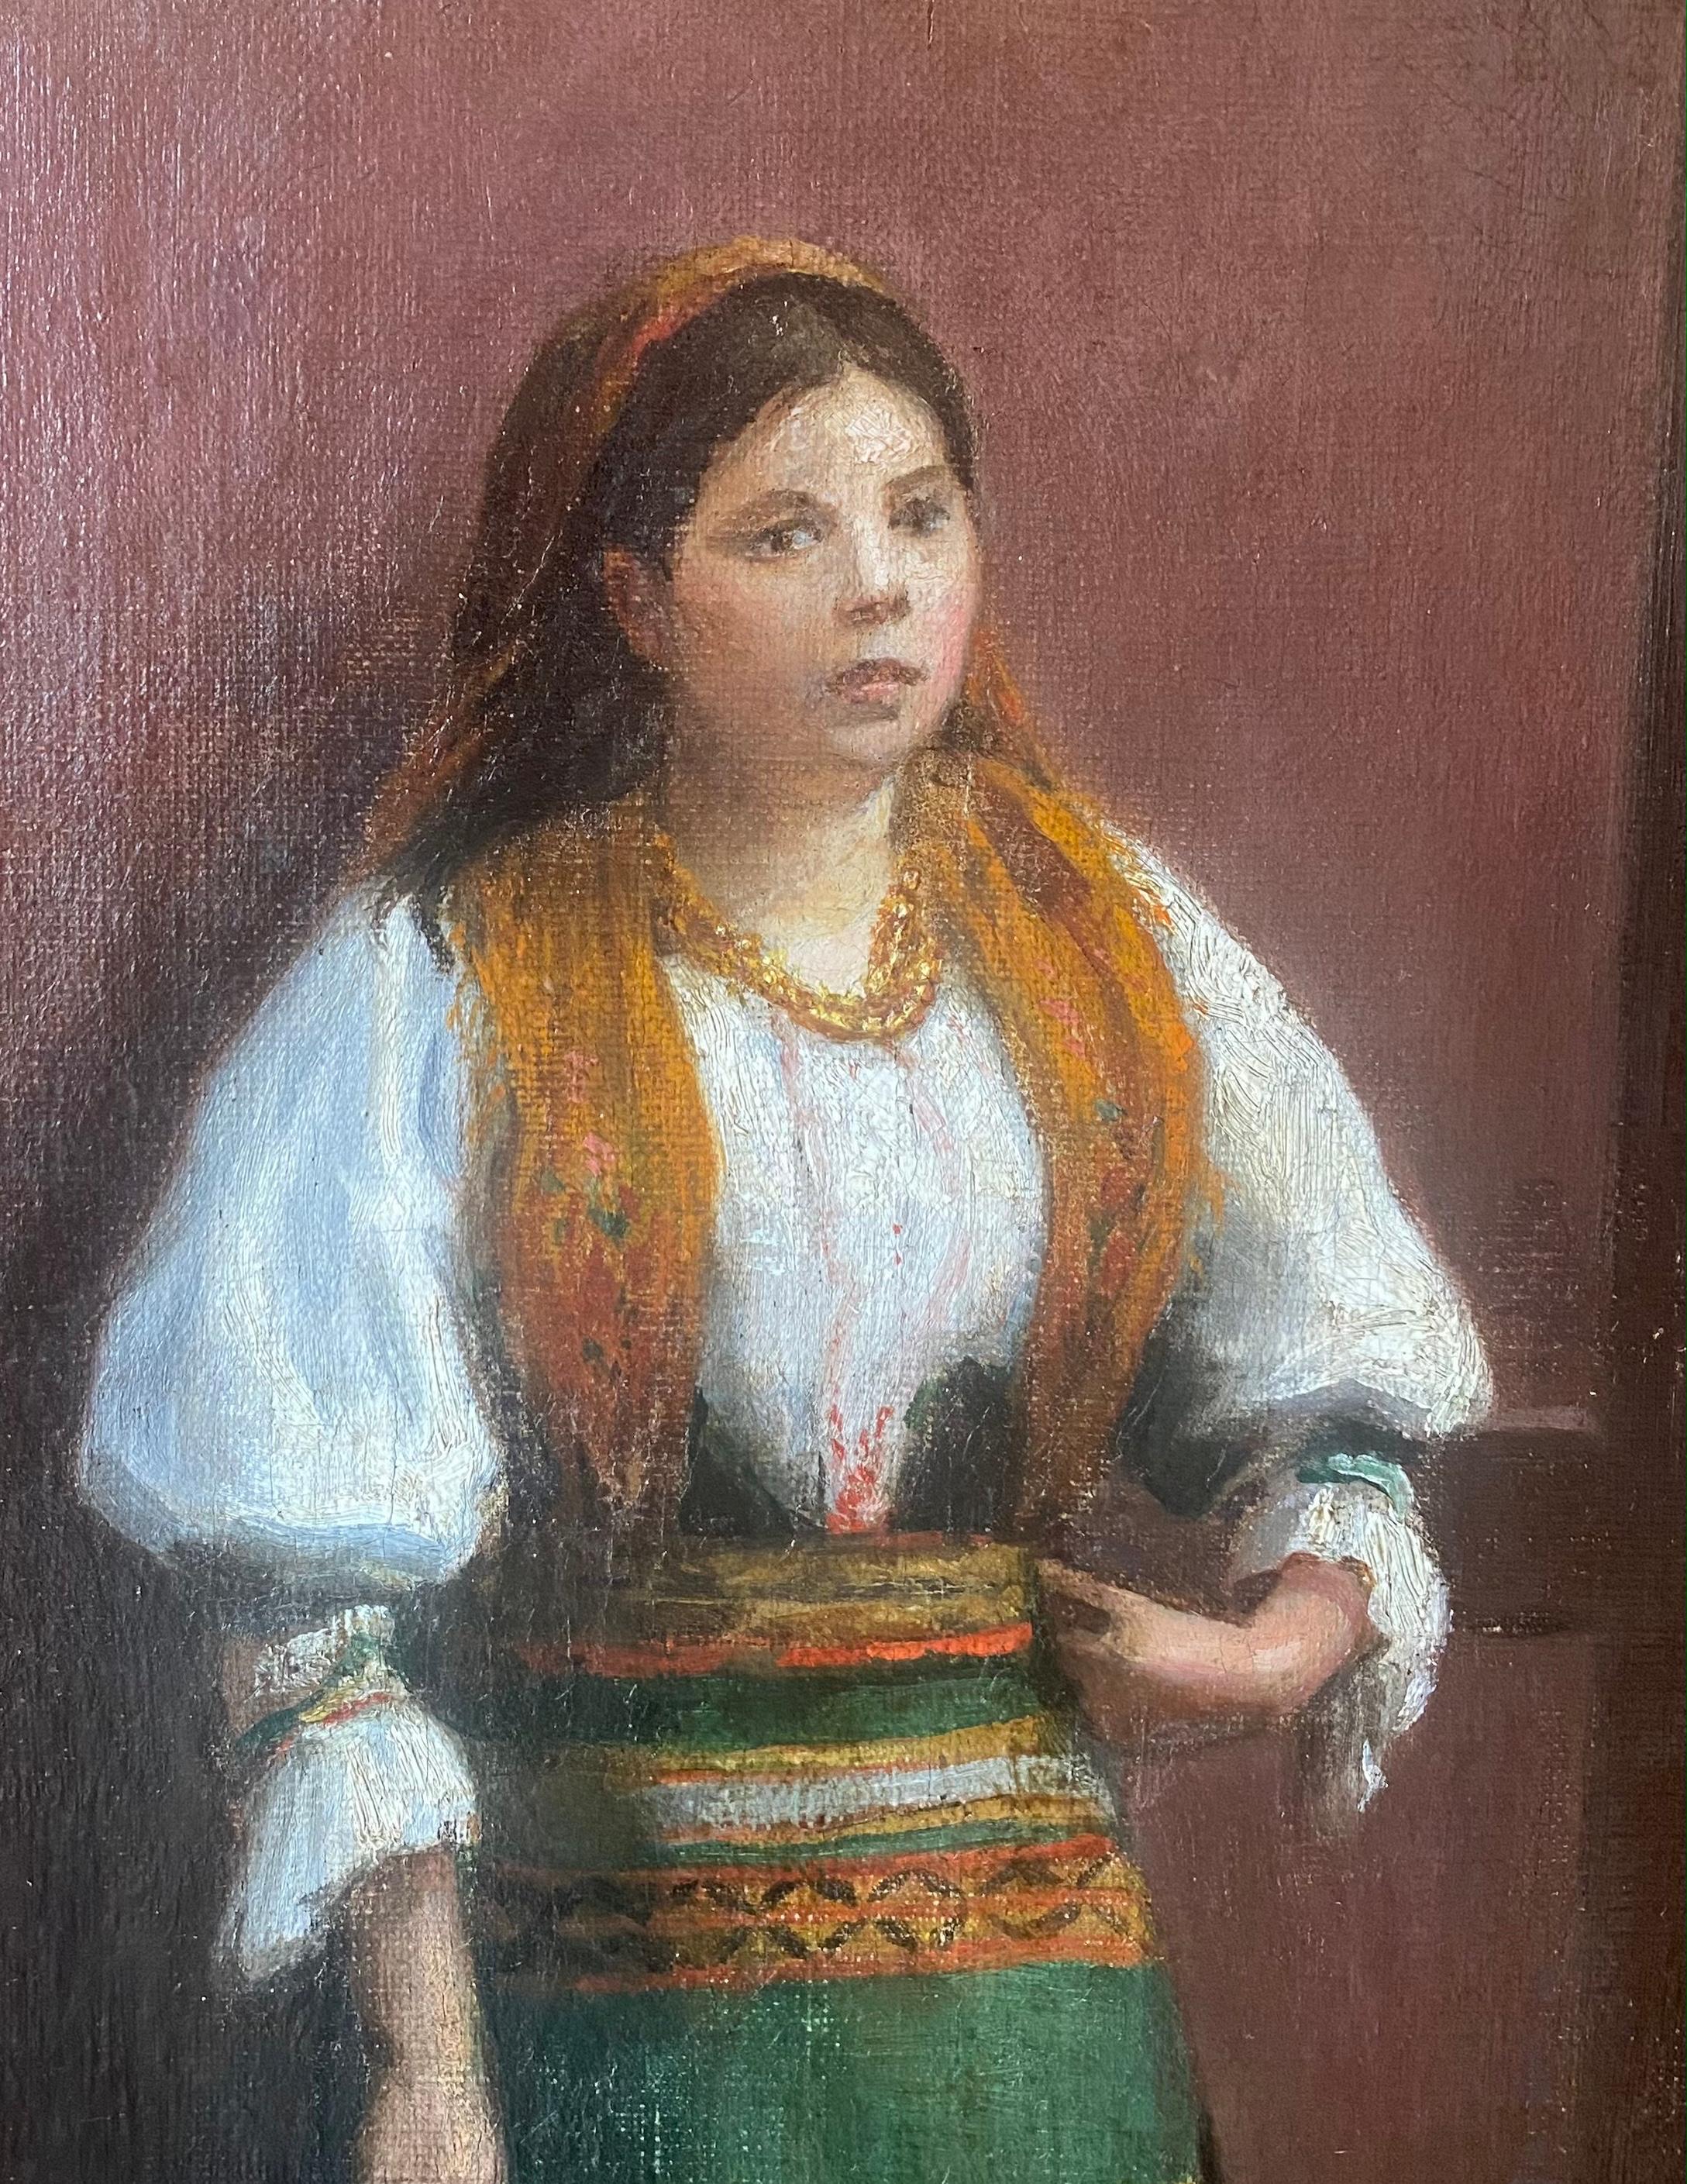 The first time model: the enigmatic young bohemian girl in traditional dress   - Academic Painting by Unknown